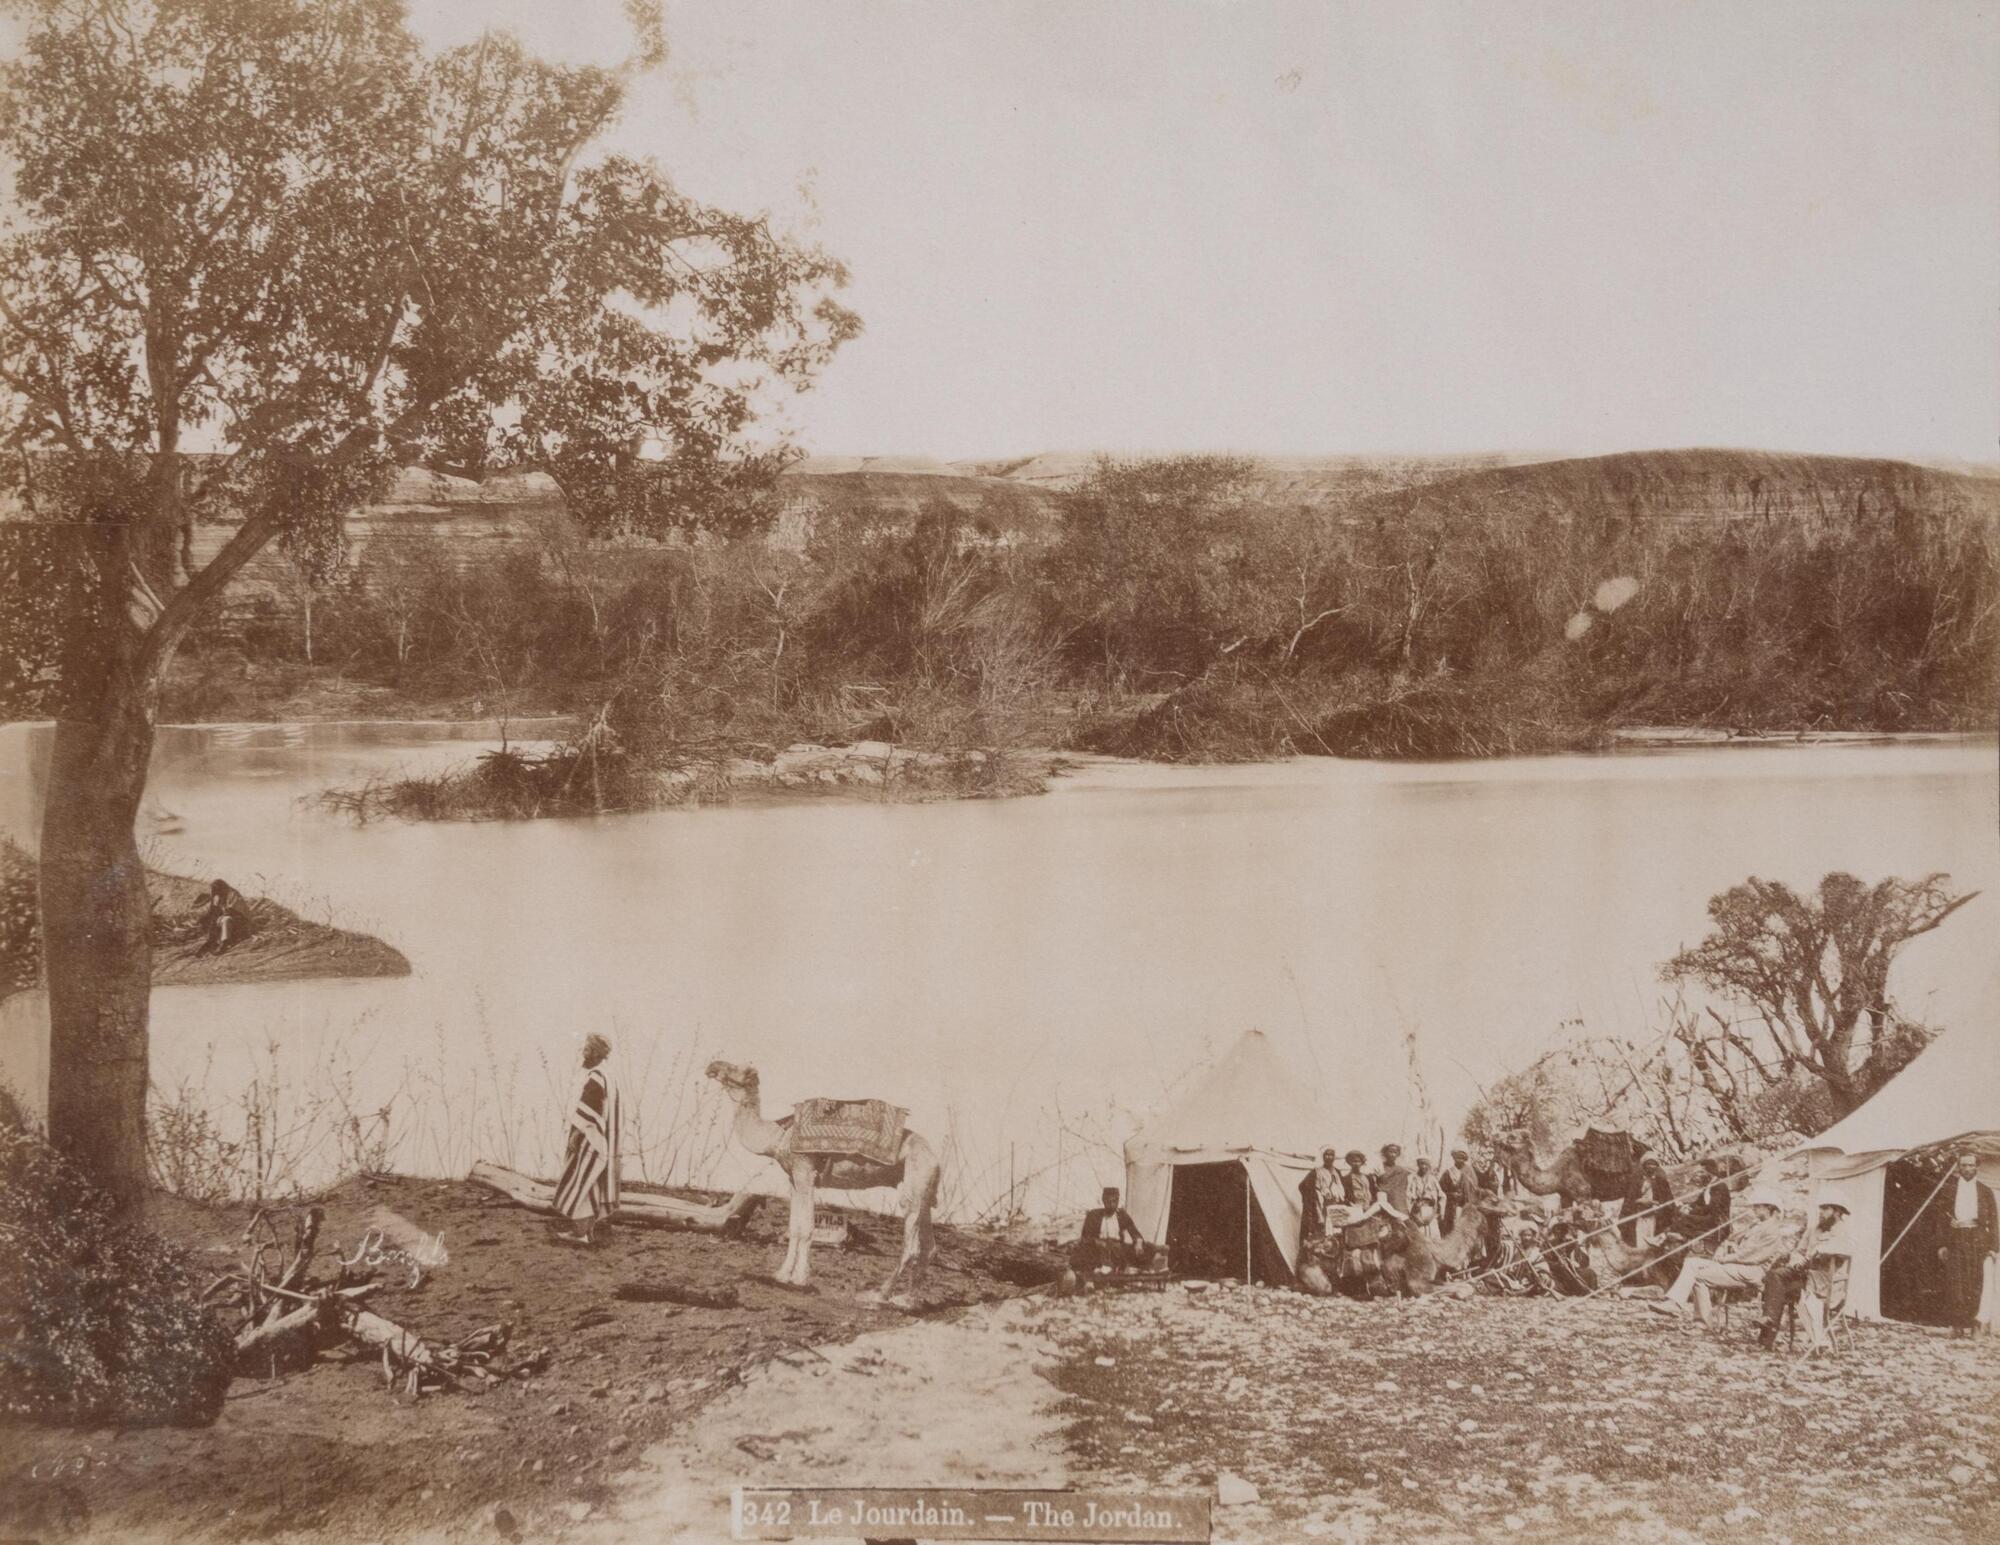 In this photograph, a group of men sit or stand near two tents along the bank of a wide river. The hills and trees on the opposite bank form the horizon line.